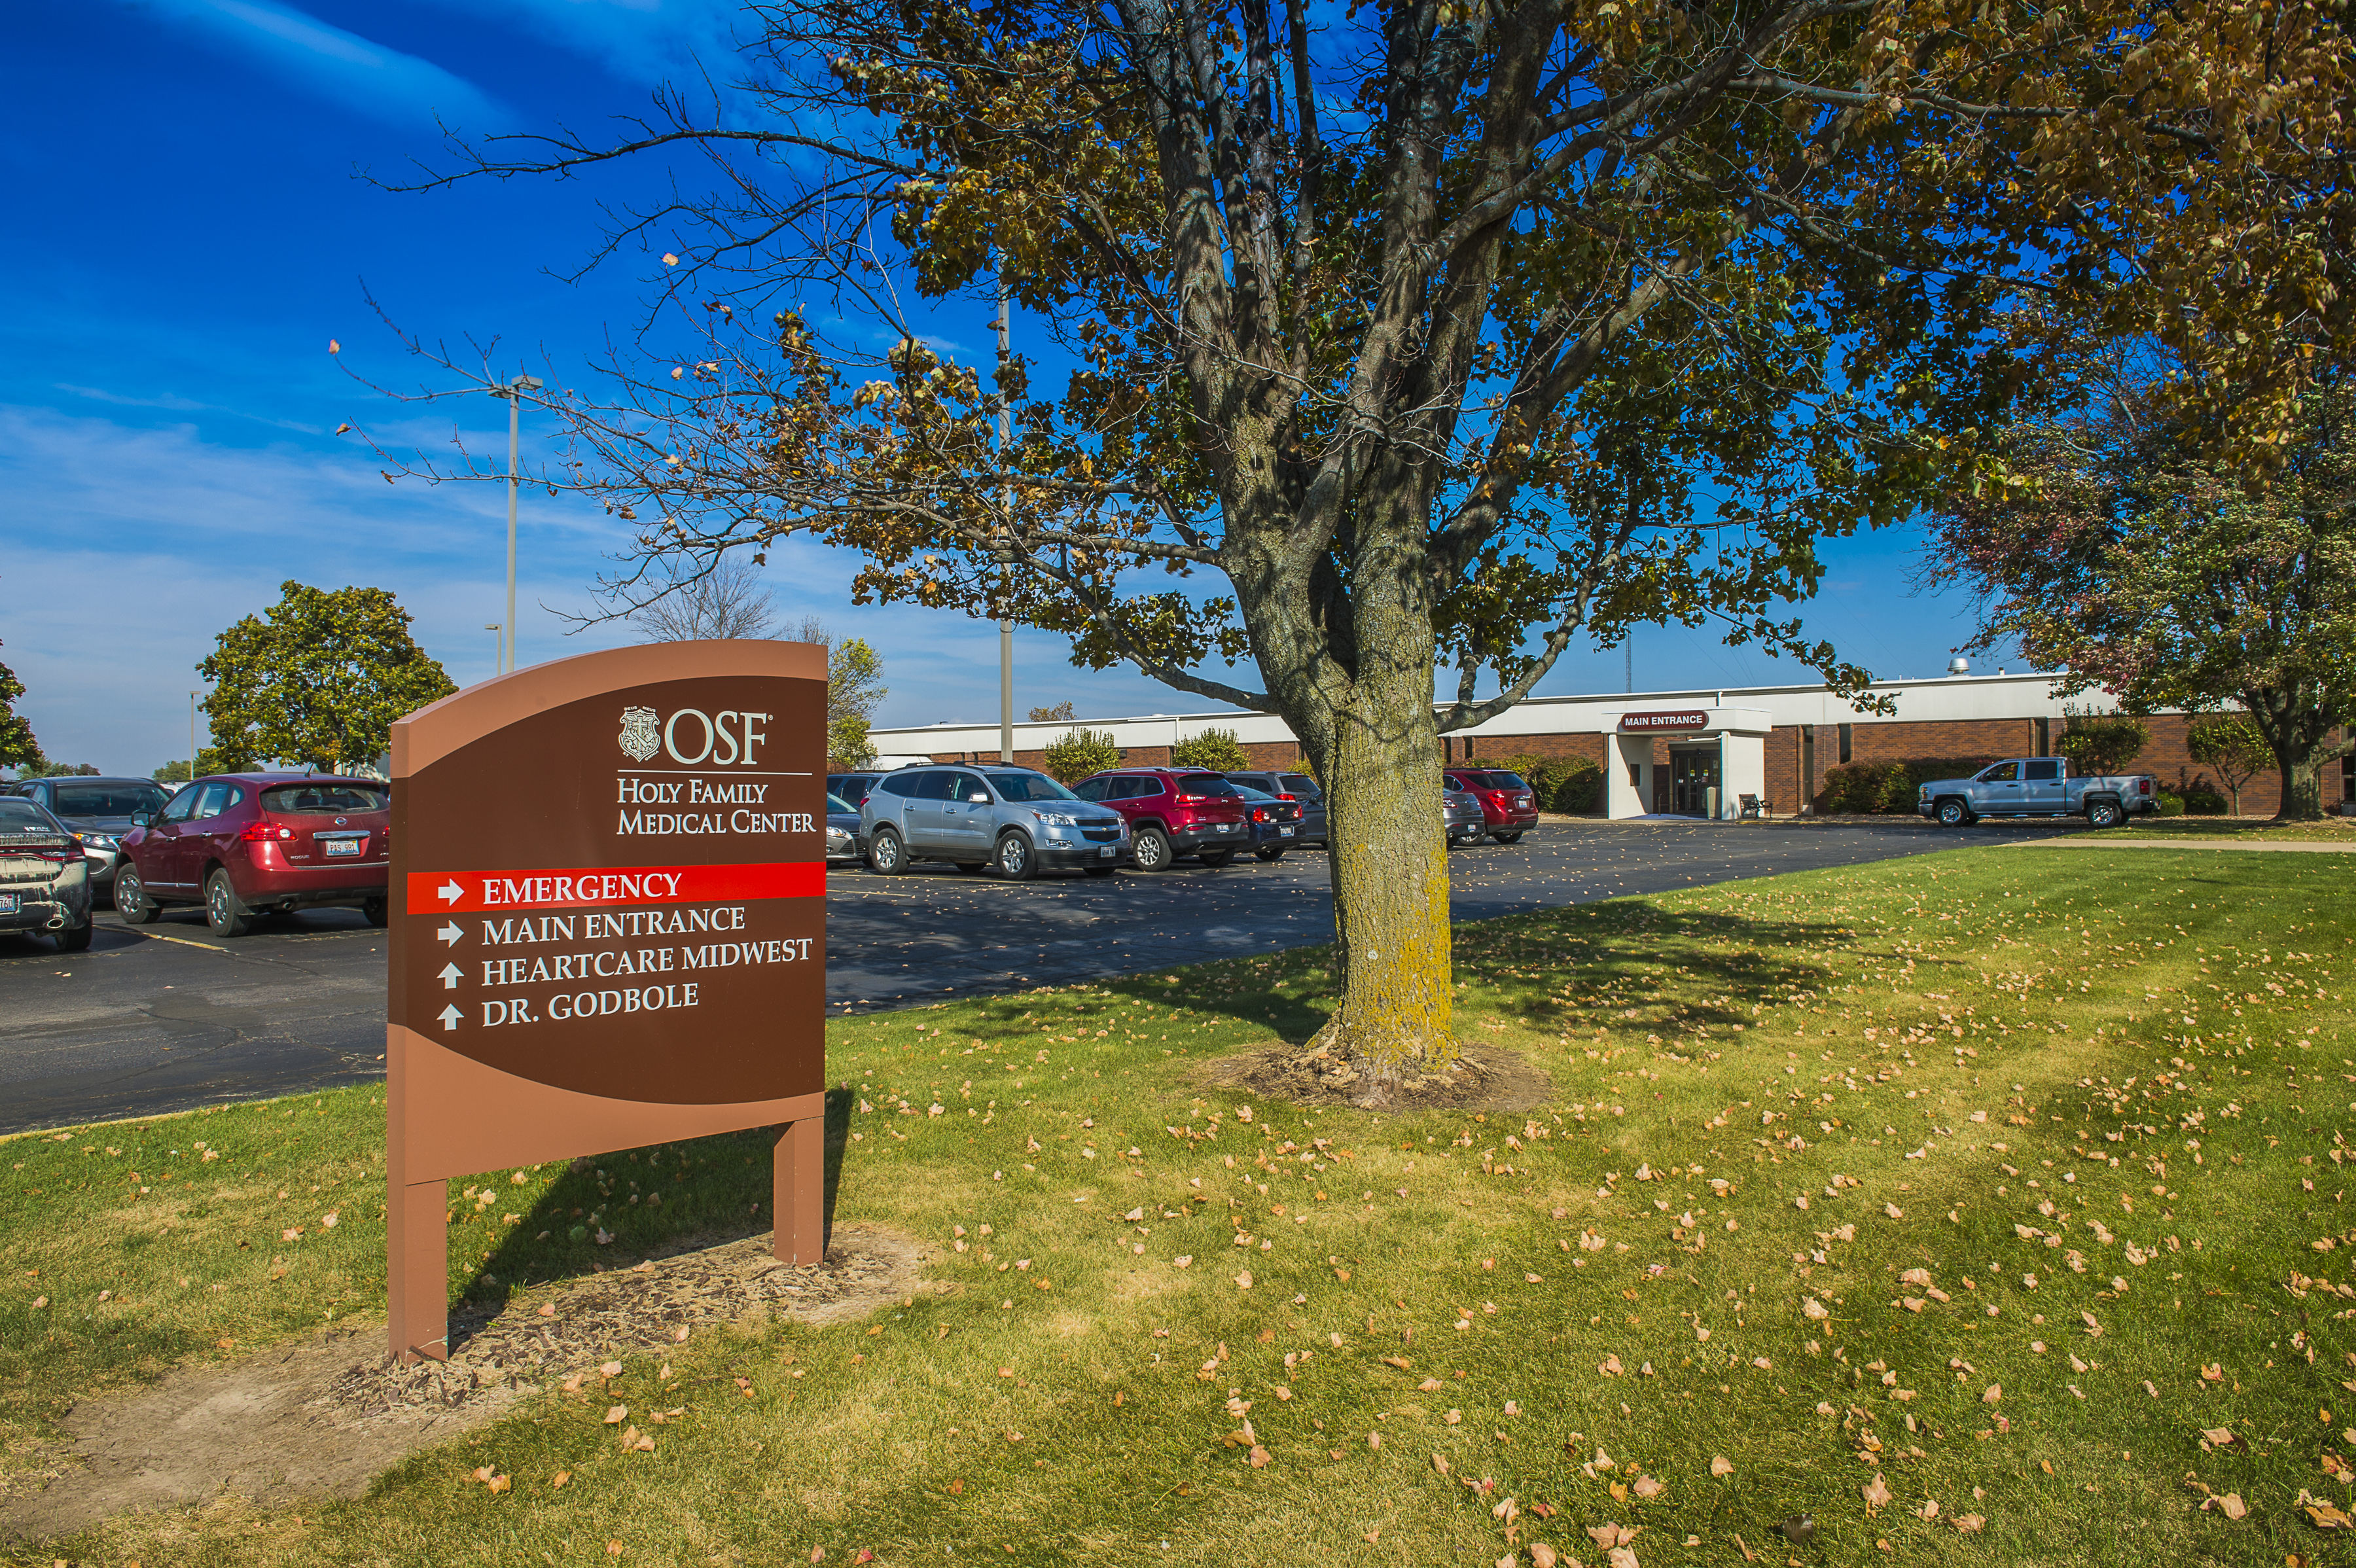 OSF Medical Group - Lung & Pulmonology, 1000 W. Harlem Avenue, Monmouth, Illinois, 61462